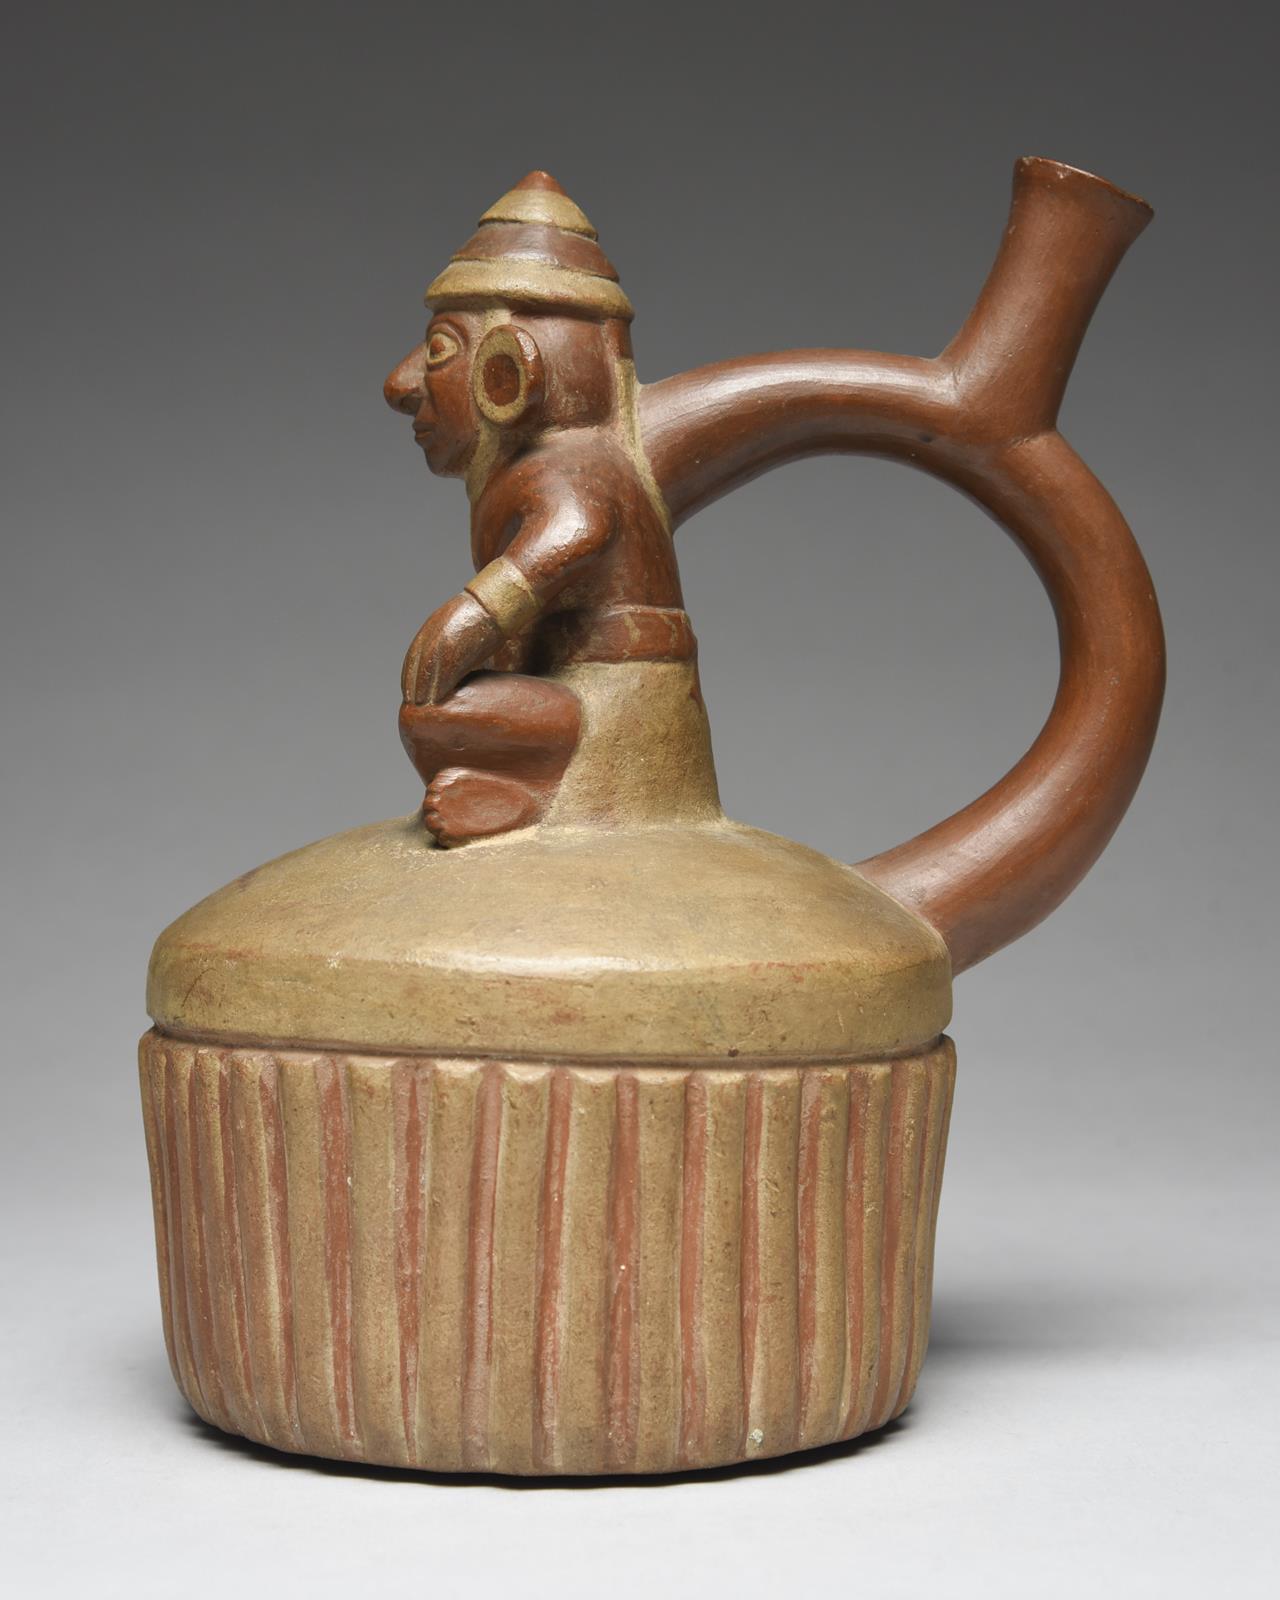 A Moche stirrup spout vessel Peru, circa 400 - 700 AD of circular ribbed form with a domed top - Image 2 of 5